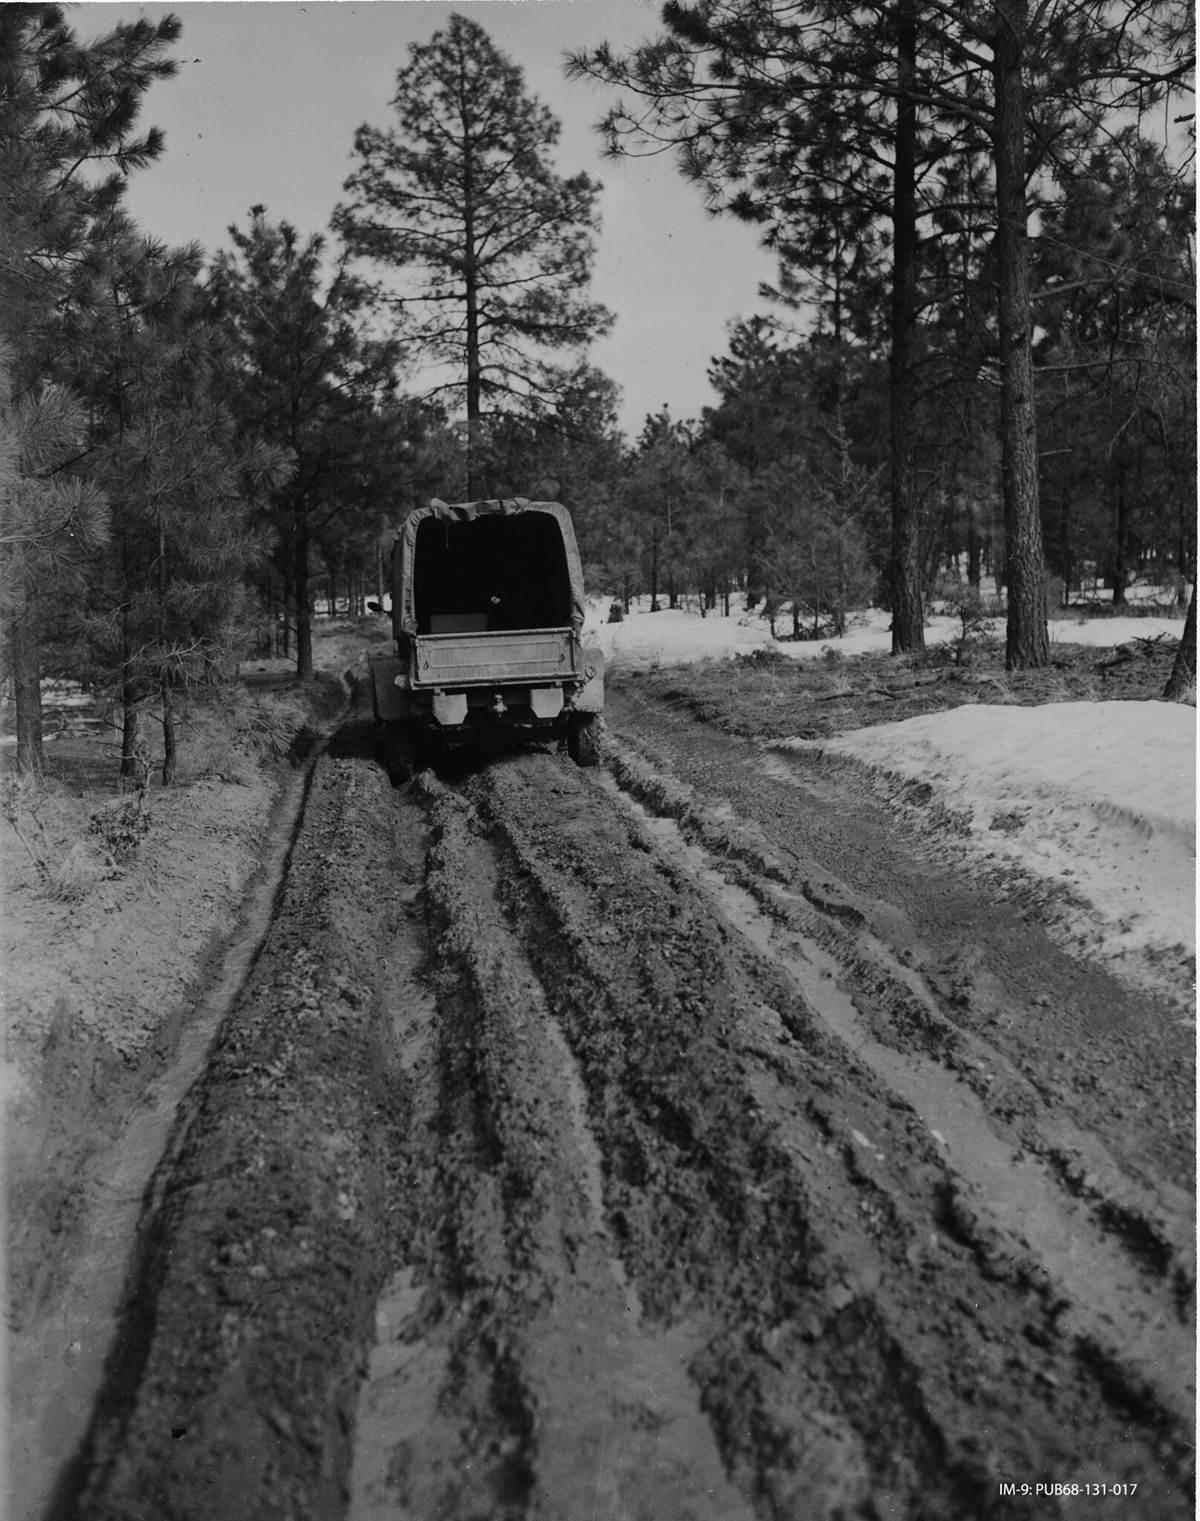 Black and white photo of Army truck in mud, trees surrounding muddy road